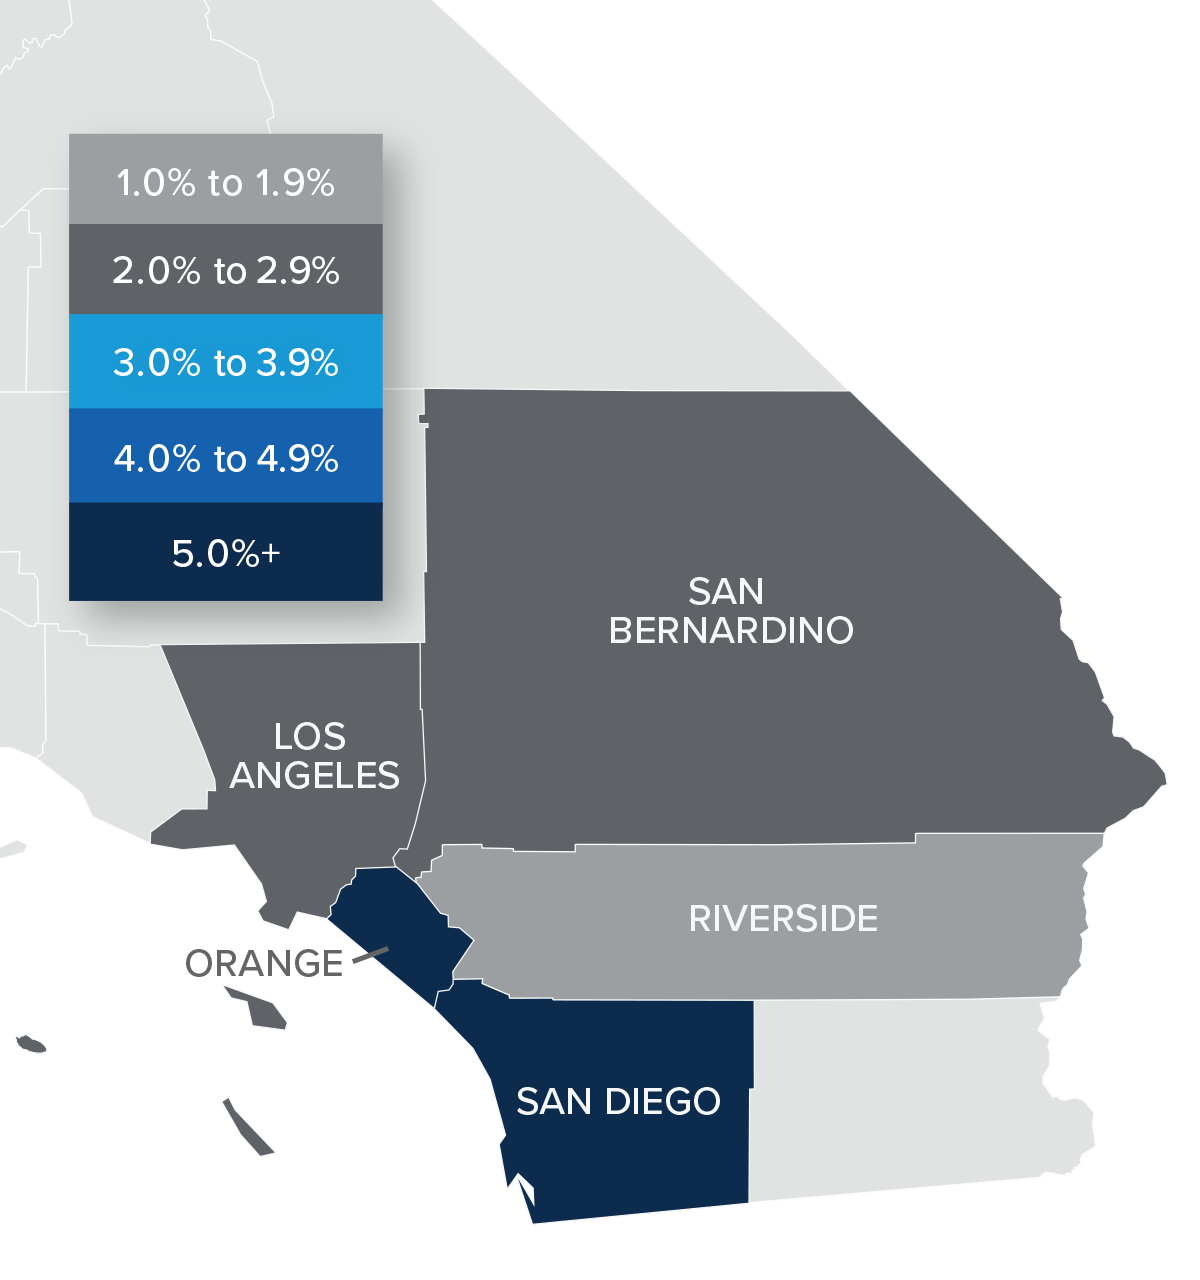 A map showing the real estate home prices percentage changes for various counties in Southern California. Different colors correspond to different tiers of percentage change. San Diego had percentage change above 5% and is represented in the corresponding navy color. Los Angeles and San Bernardino were in the 2-2.9% range. Riverside was in the -1-1.9% range and is represented in the light grey color on the map. 